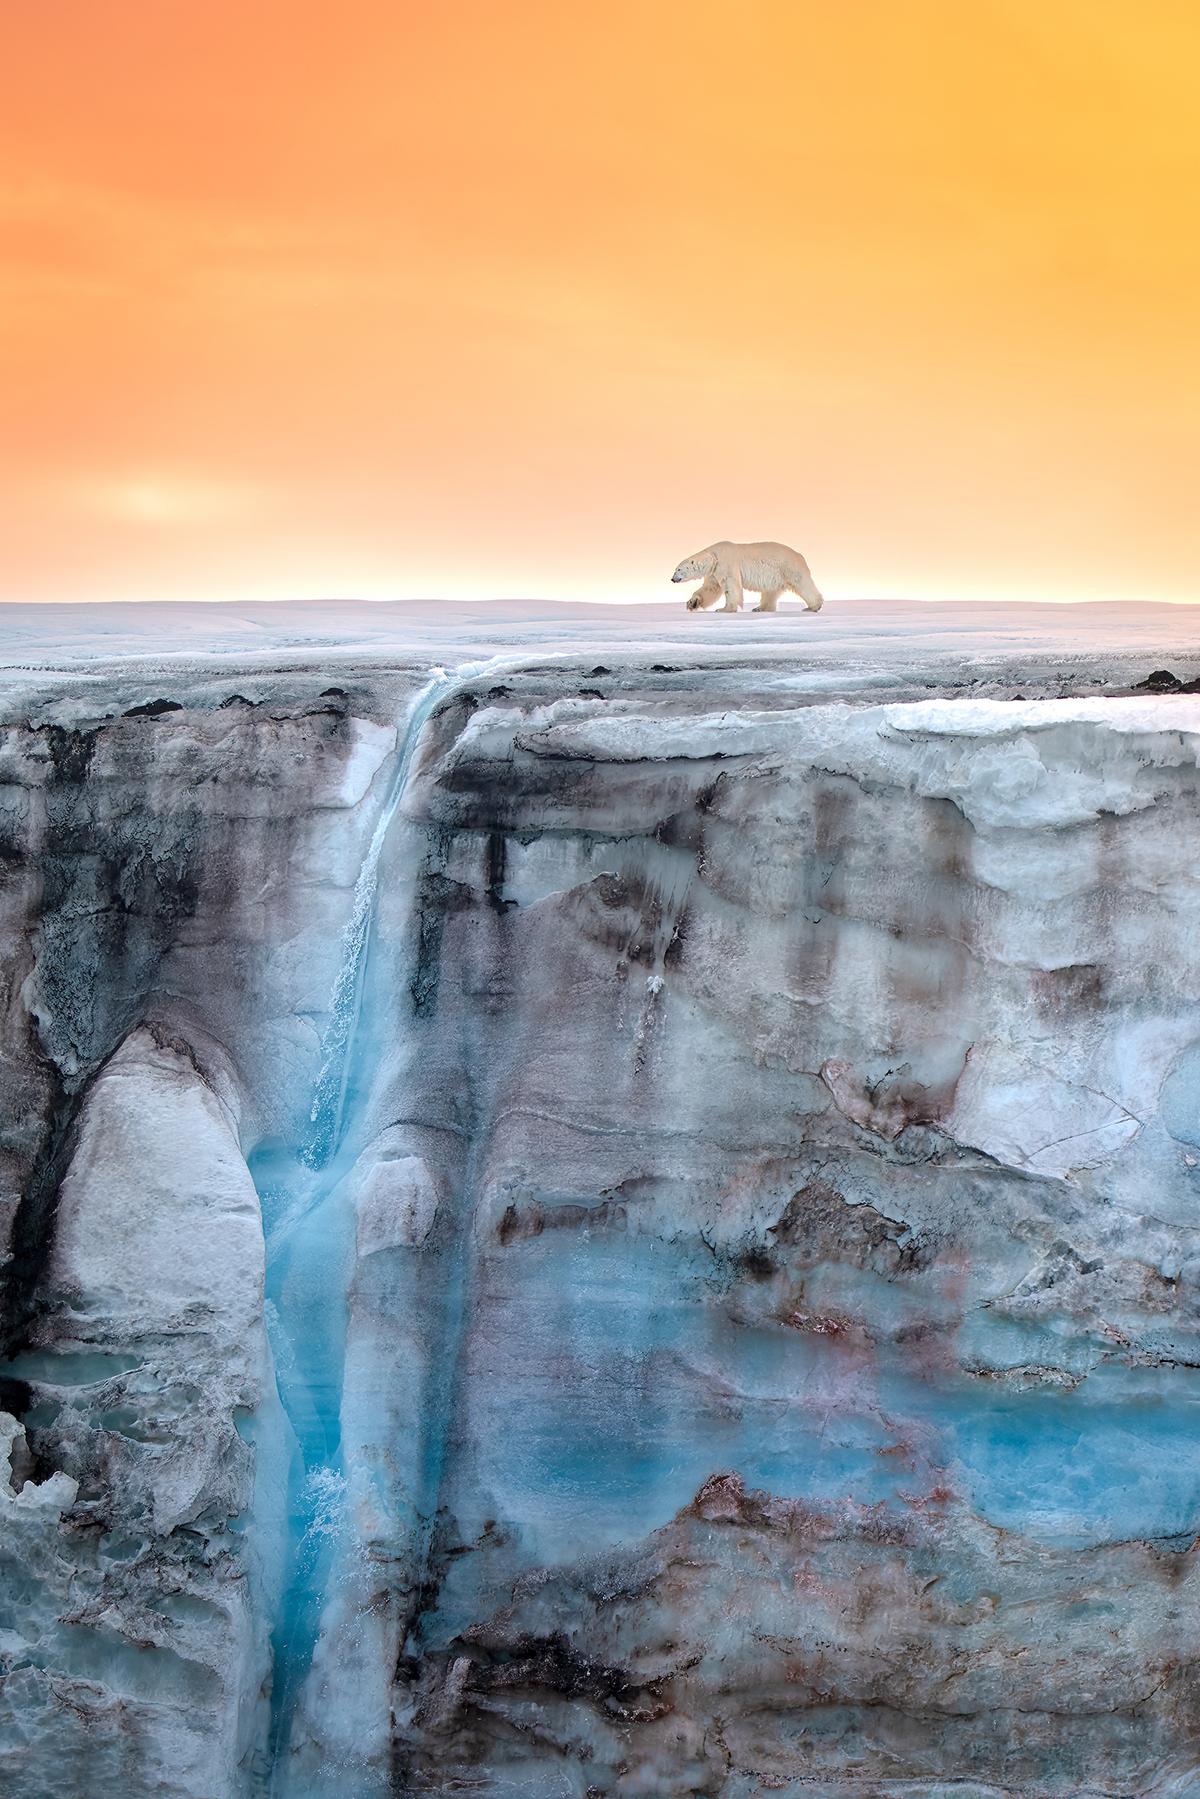  This image of a polar bear walking across a glacier adorned by a waterfall is illuminated by the Arctic sun. (Courtesy of Ocean Photographer of the Year)